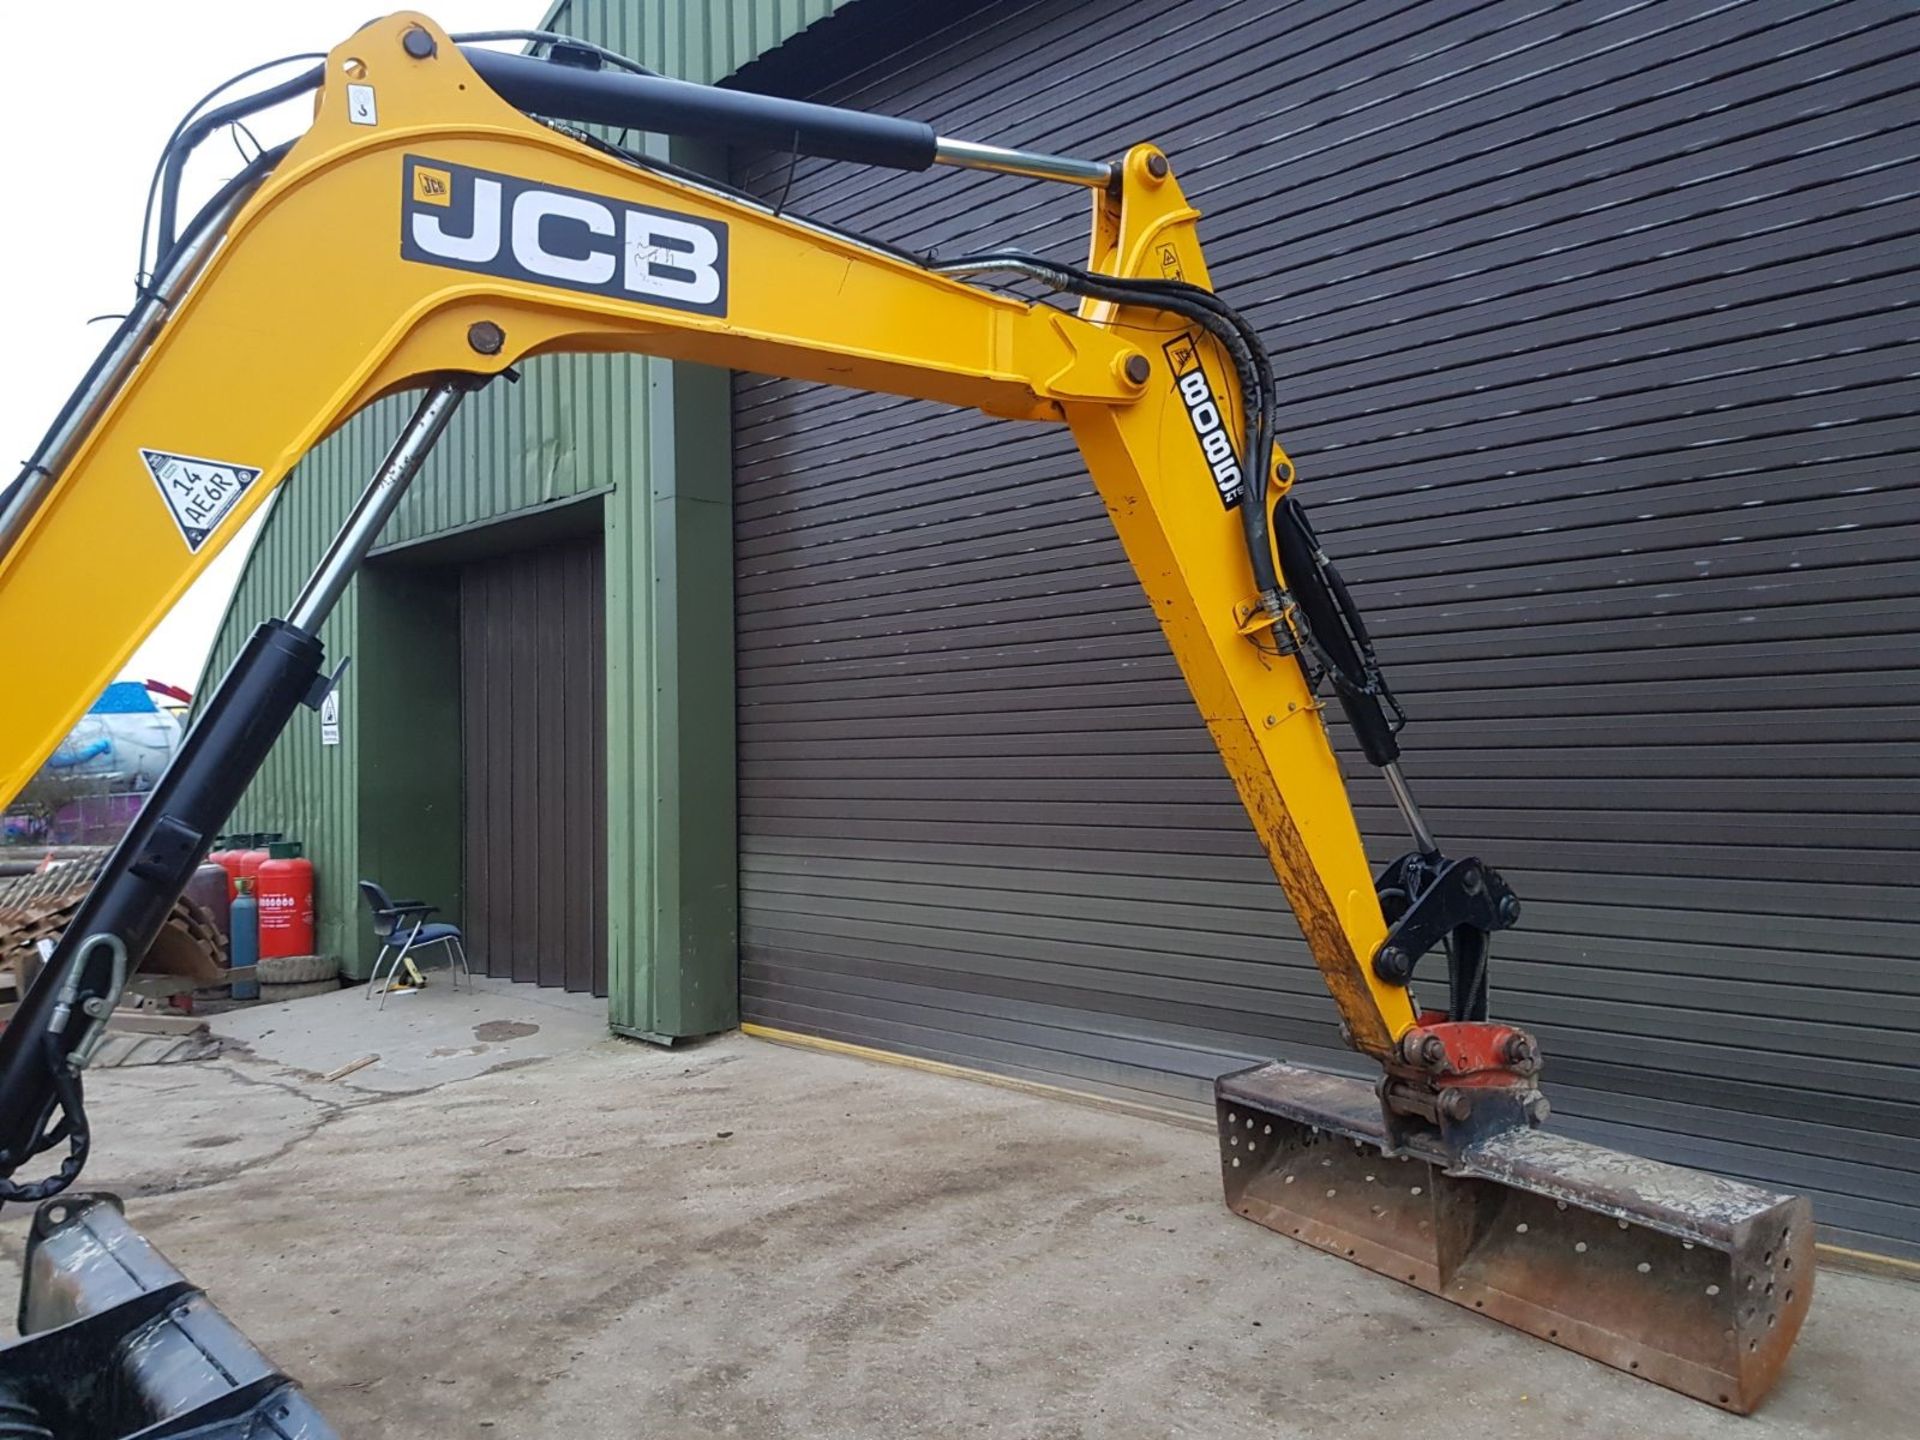 JCB 8085 360° Midi Excavator, Serial No -, Year of Manufacture -, Indicated Hours: 4320, Wide - Image 7 of 10